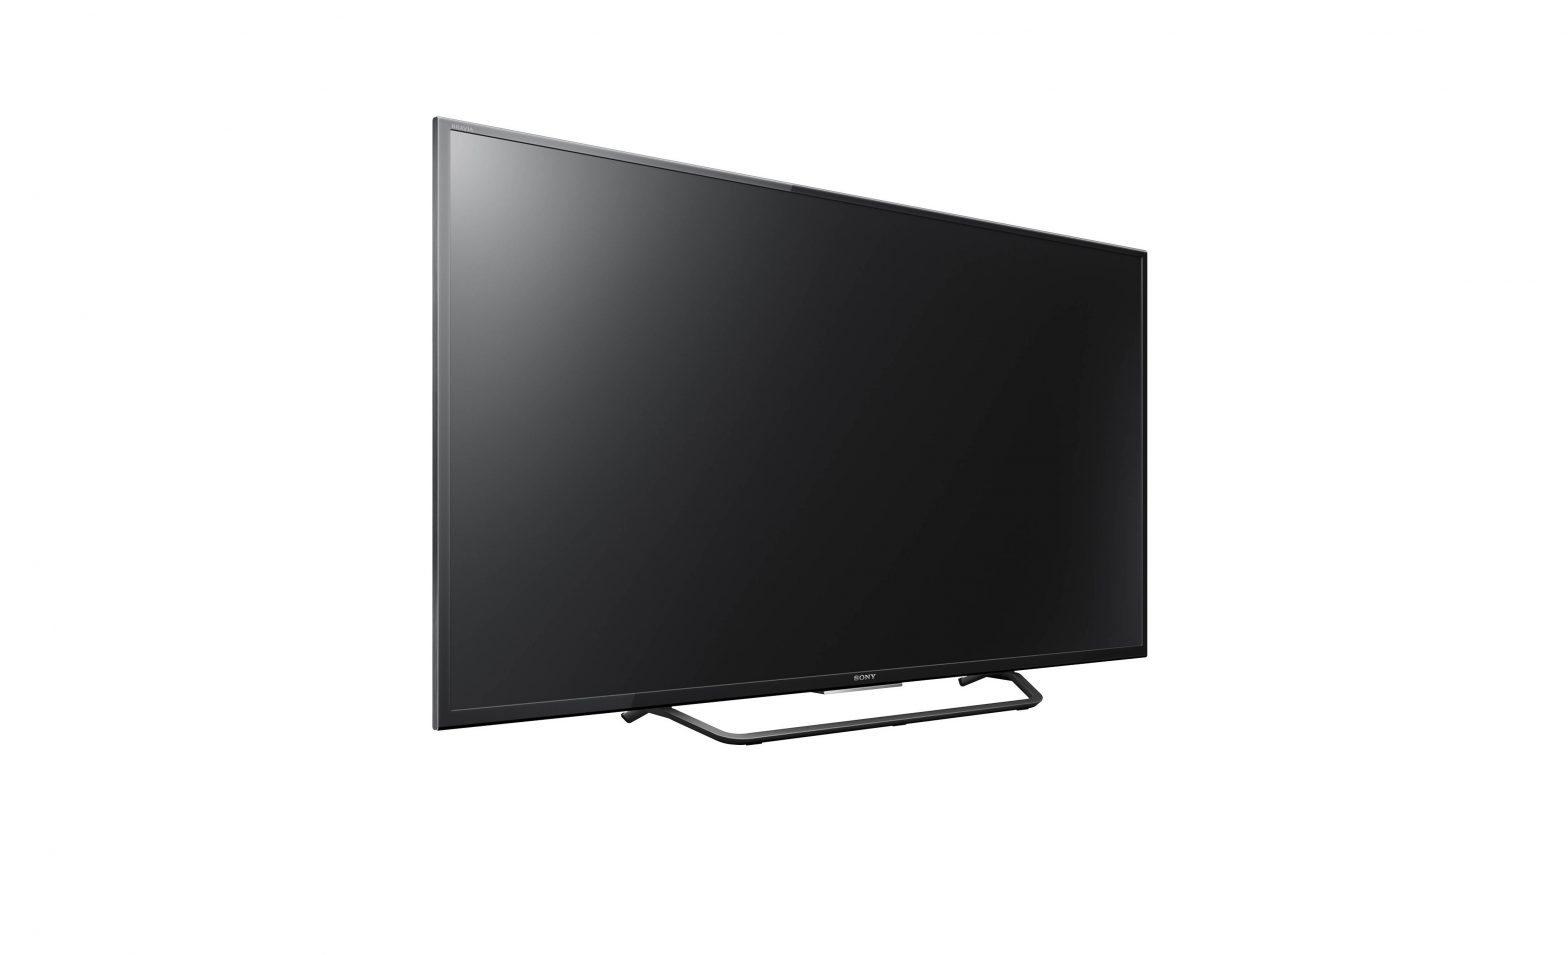 SONY RAVIA X950G 85″ Class HDR 4K UHD Smart Commercial LED TV Owner’s Manual